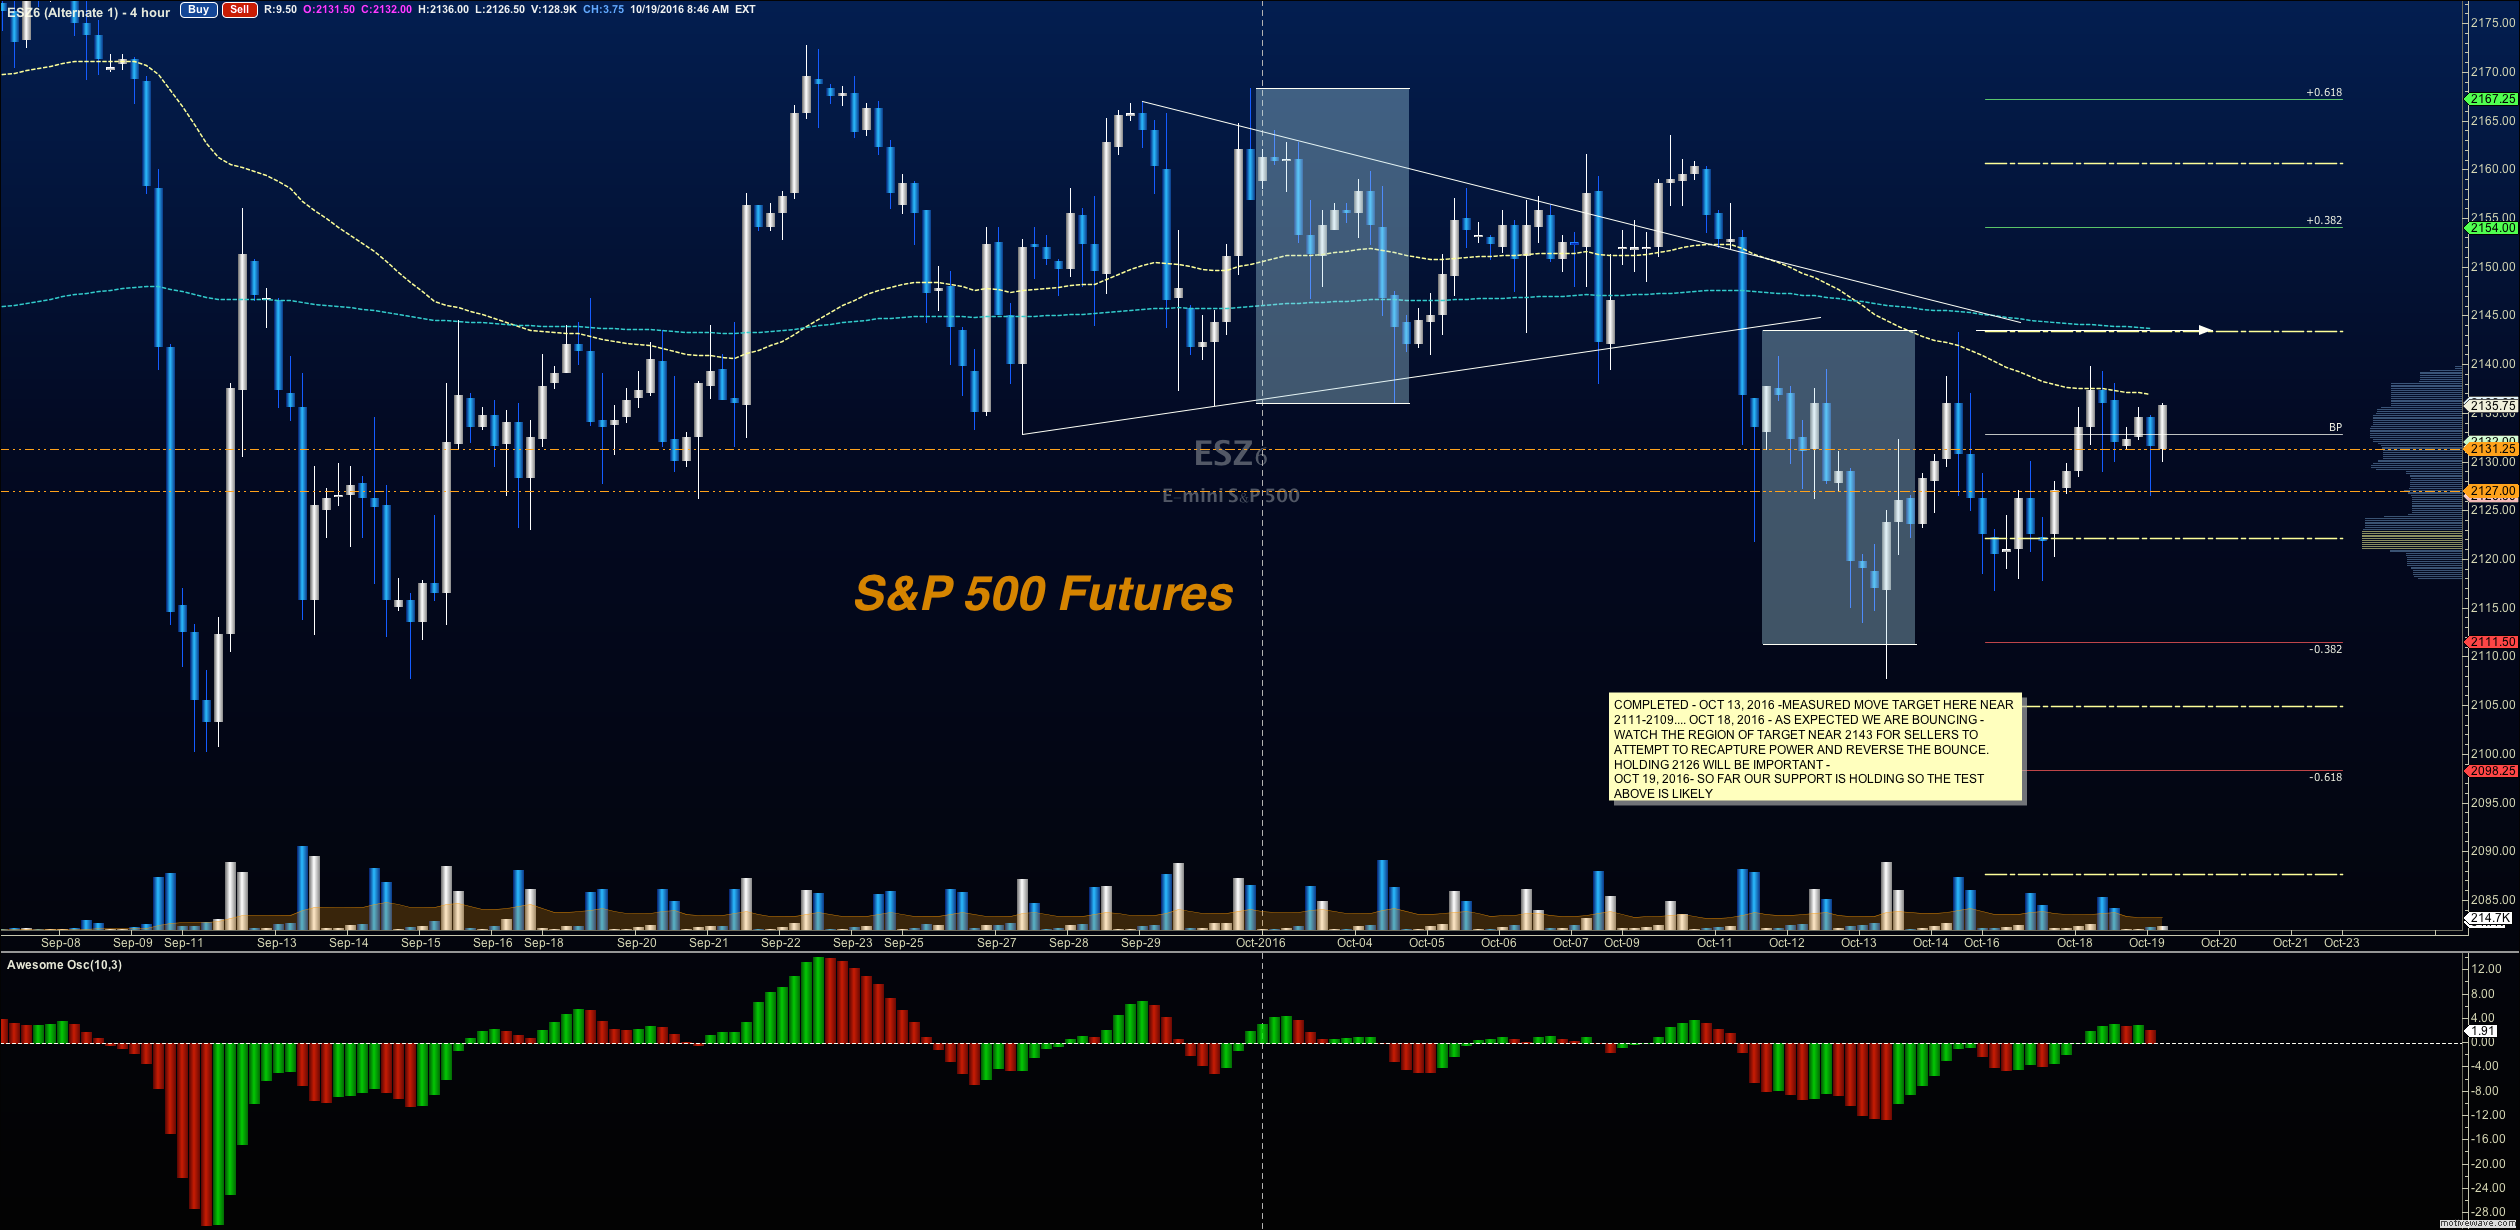 S&P 500 Futures Trading Outlook For October 19